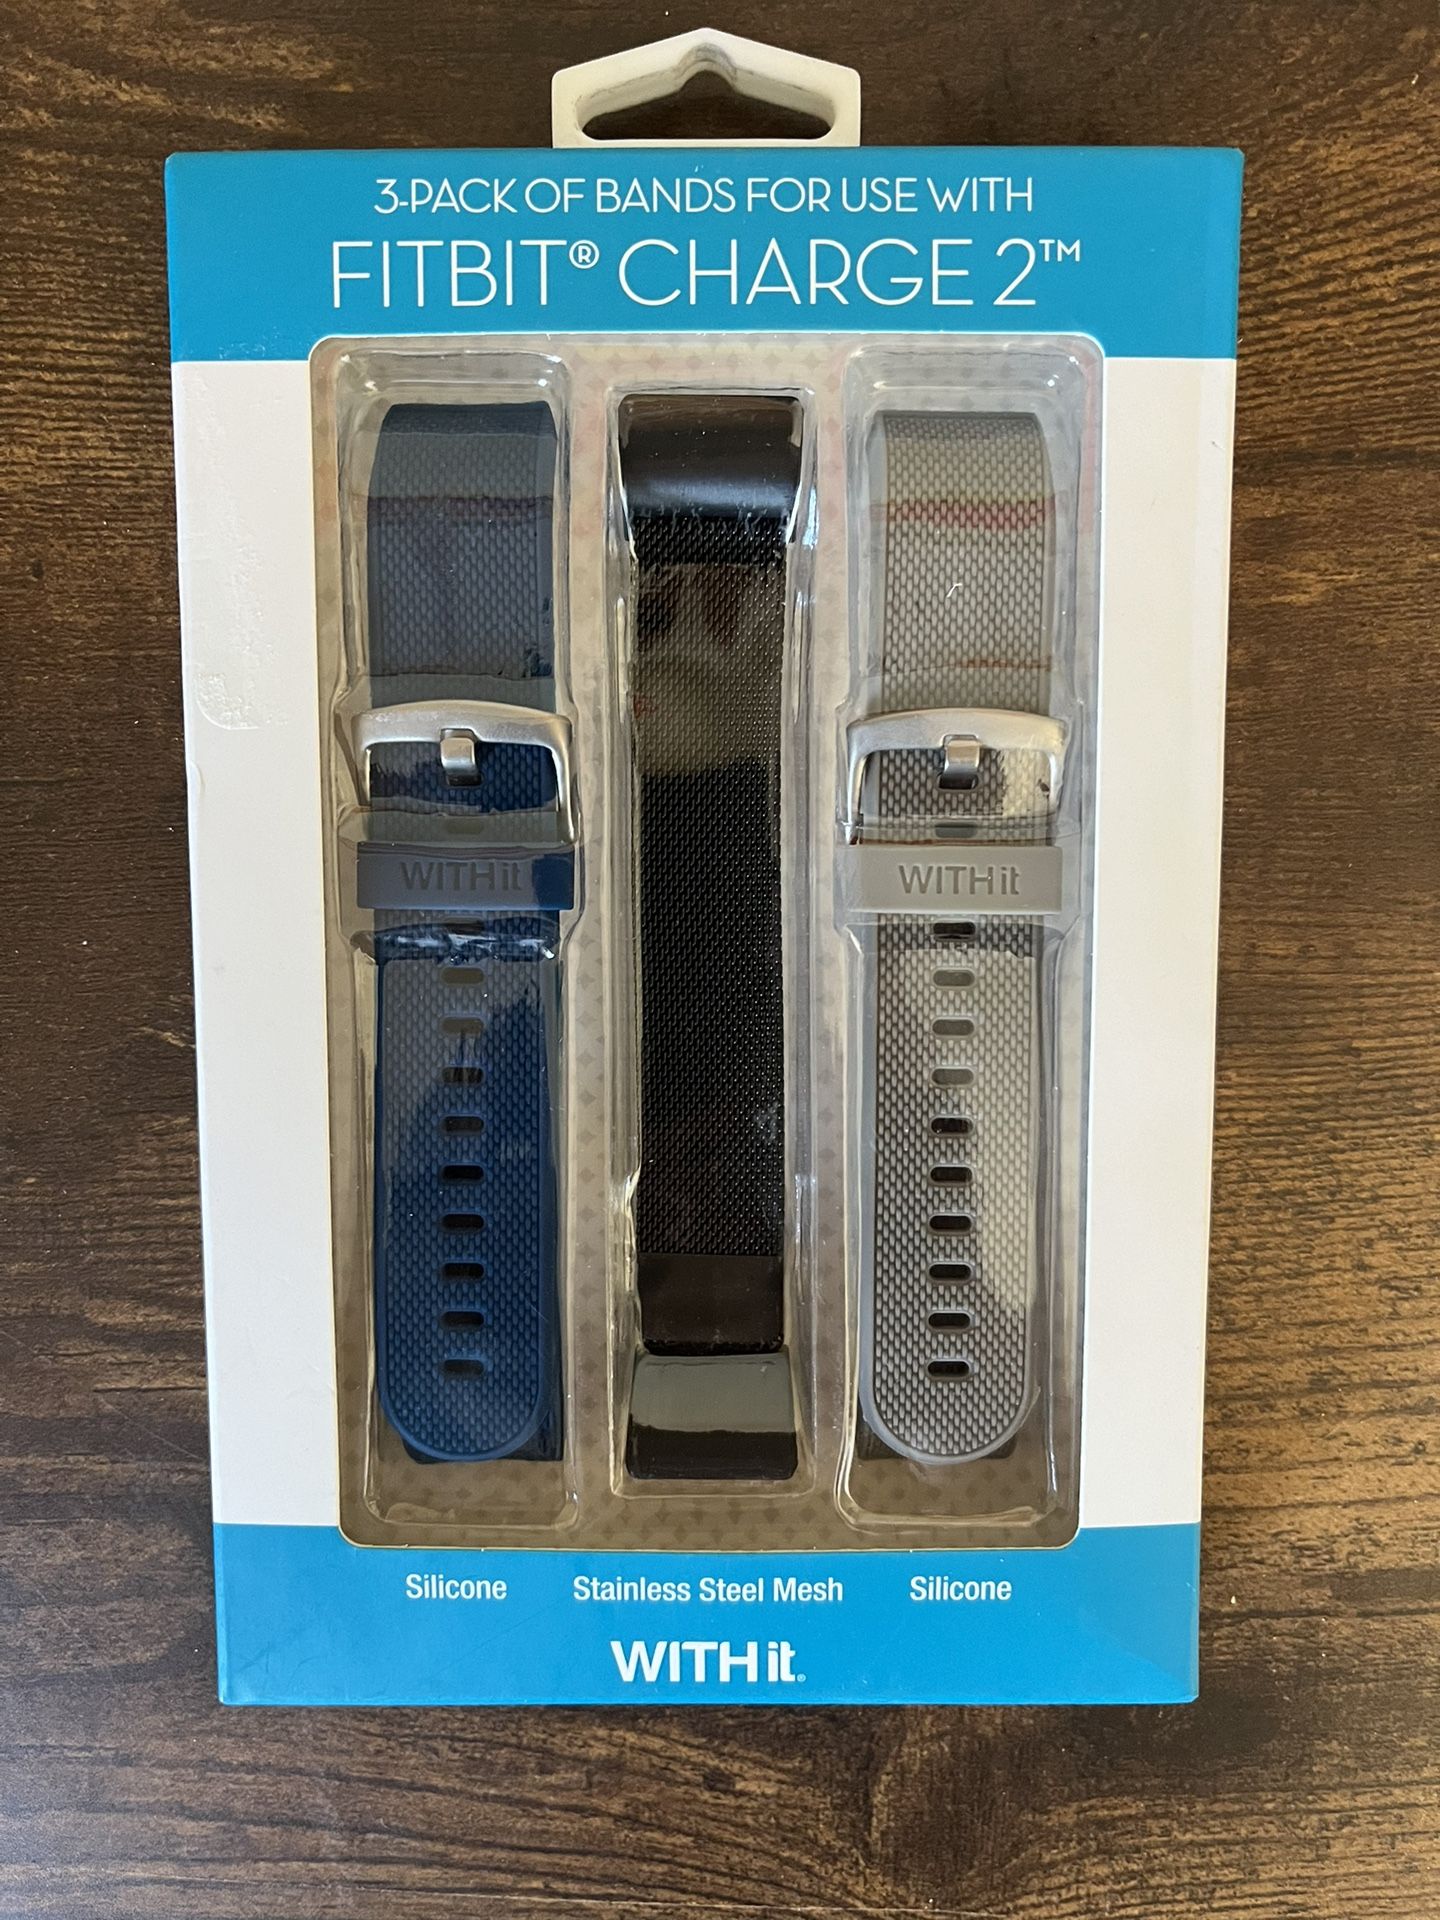 New, 3 Pack, Fitbit Charge 2 Bands